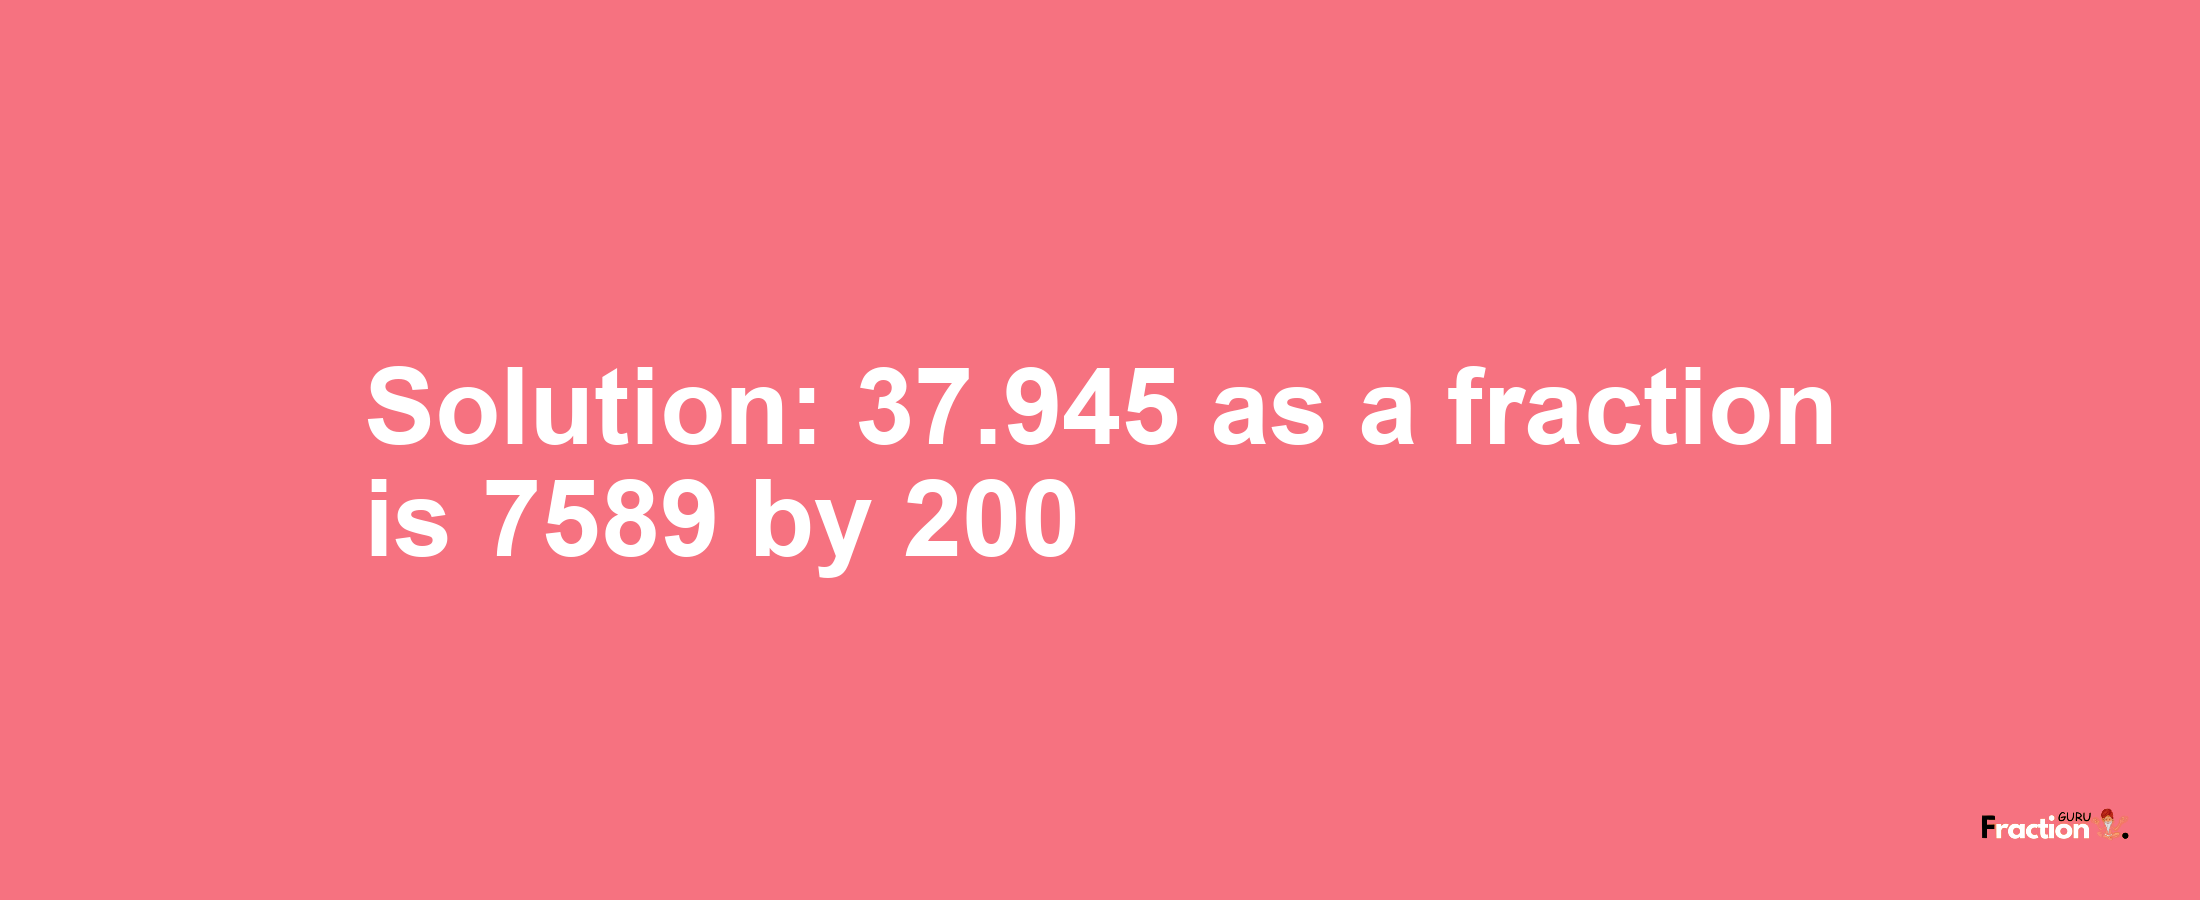 Solution:37.945 as a fraction is 7589/200